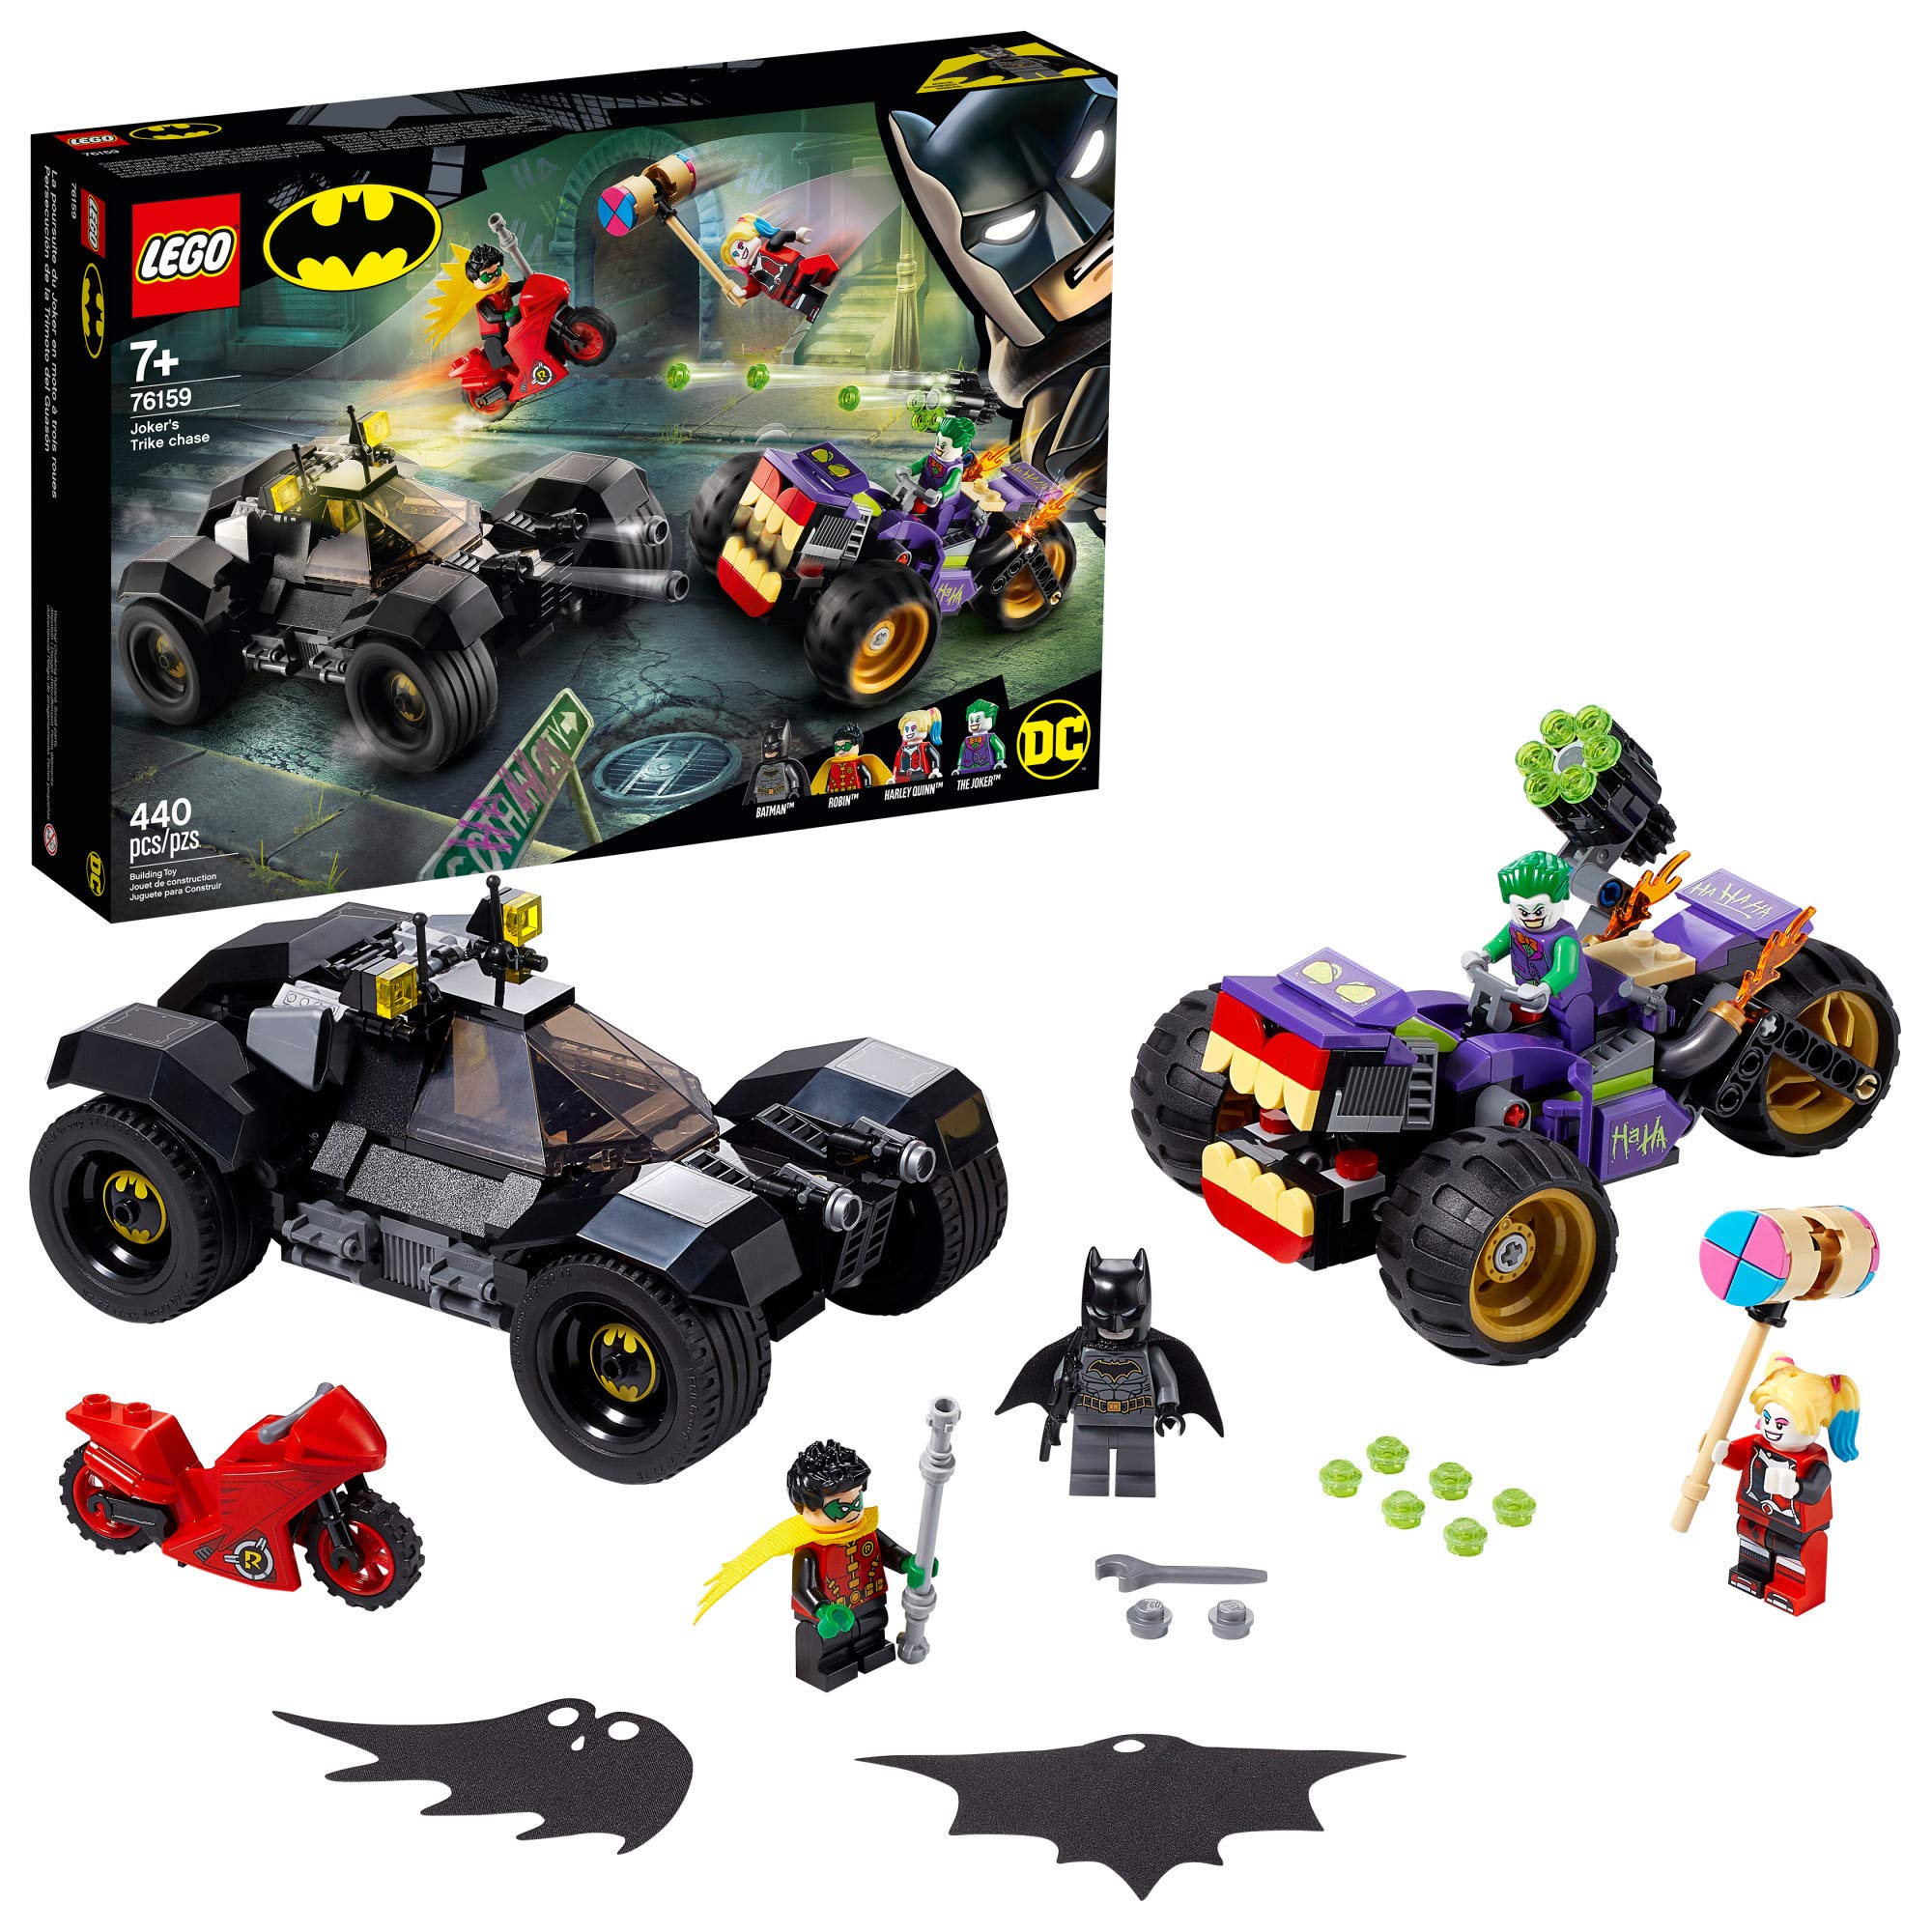 LEGO DC Batman Joker's Trike Chase 76159 Super-Hero Cars and Motorcycle Playset, Mini Shooting Batmobile Toy, for Fans of Batman, Robin, The Joker and Harley Quinn (440 Pieces)